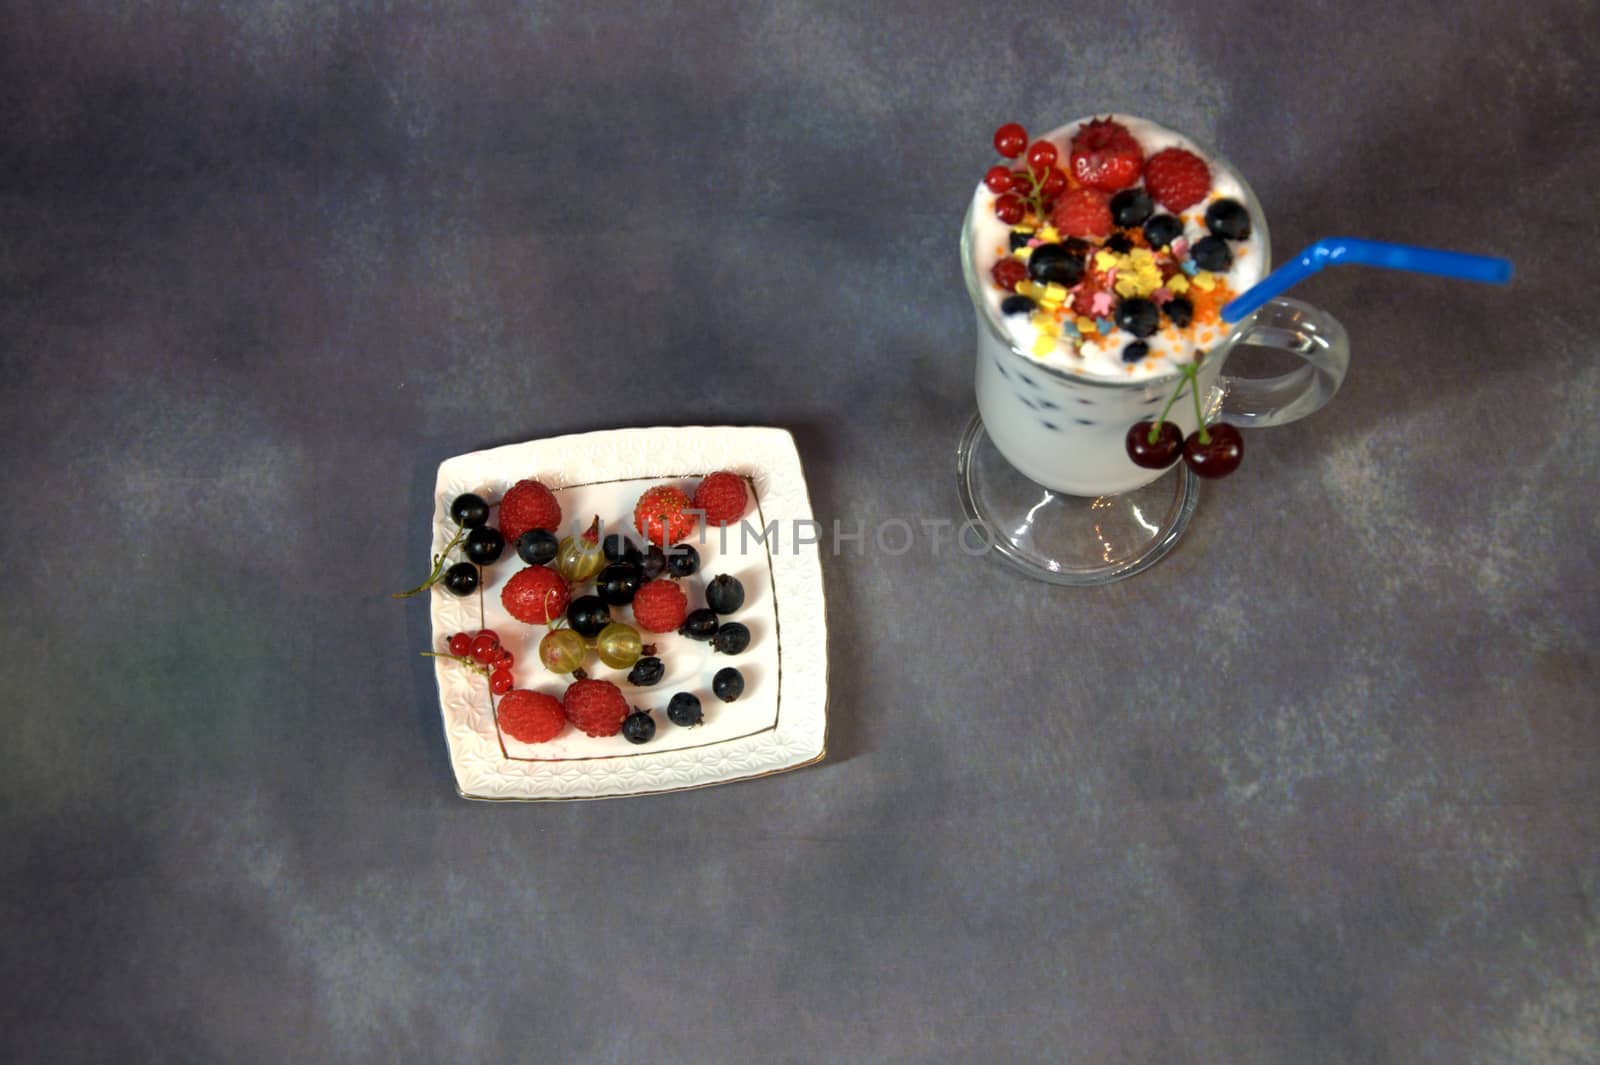 A glass with a milkshake with wild berries and a straw, stands next to a saucer filled with berries.